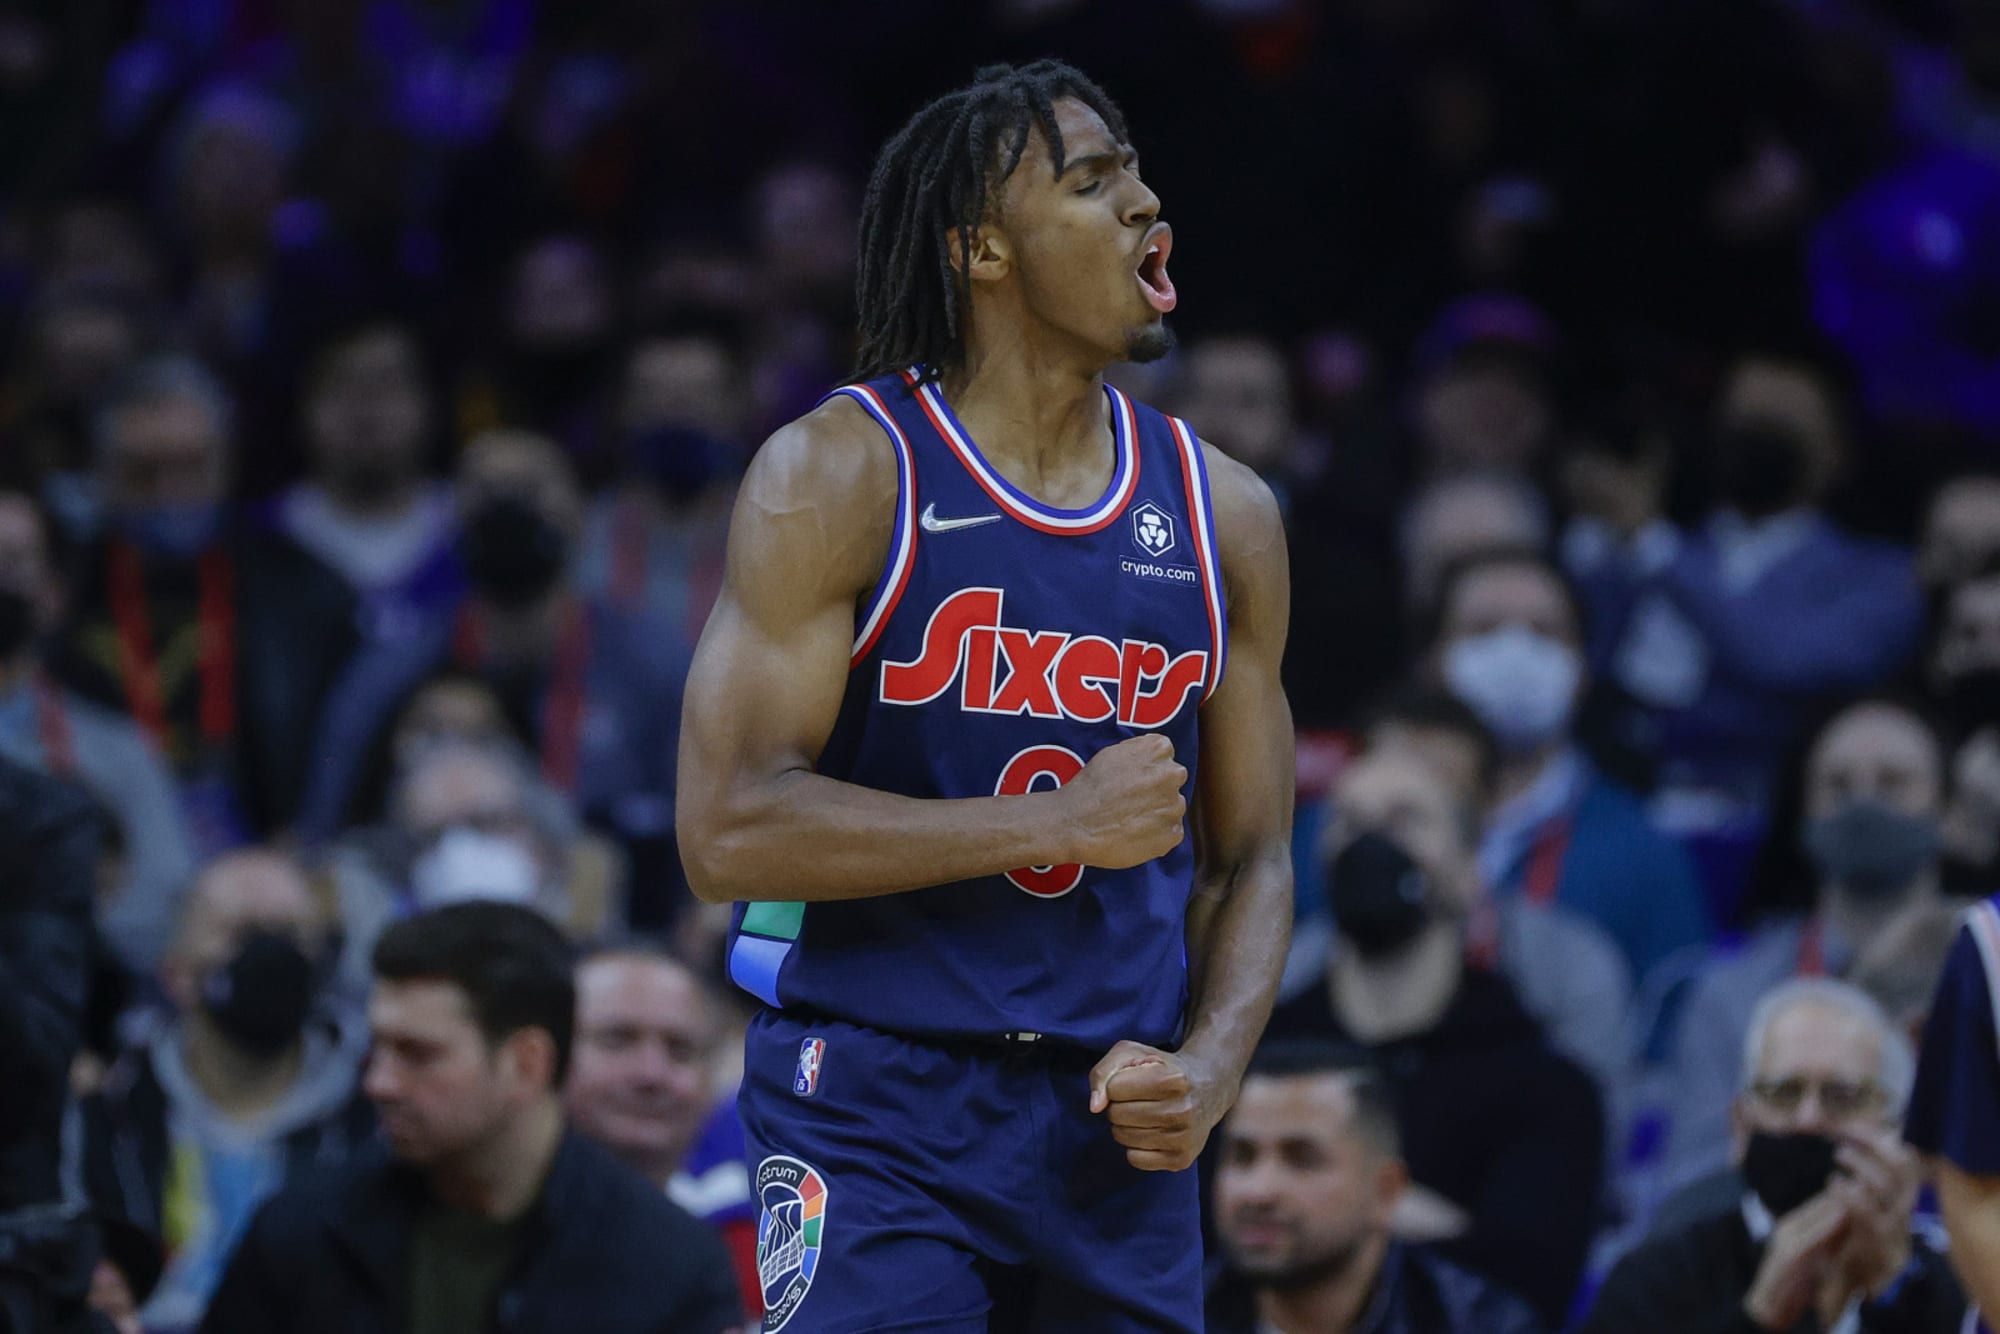 Sixers guard Tyrese Maxey draws ultimate praise from former NBA MVP